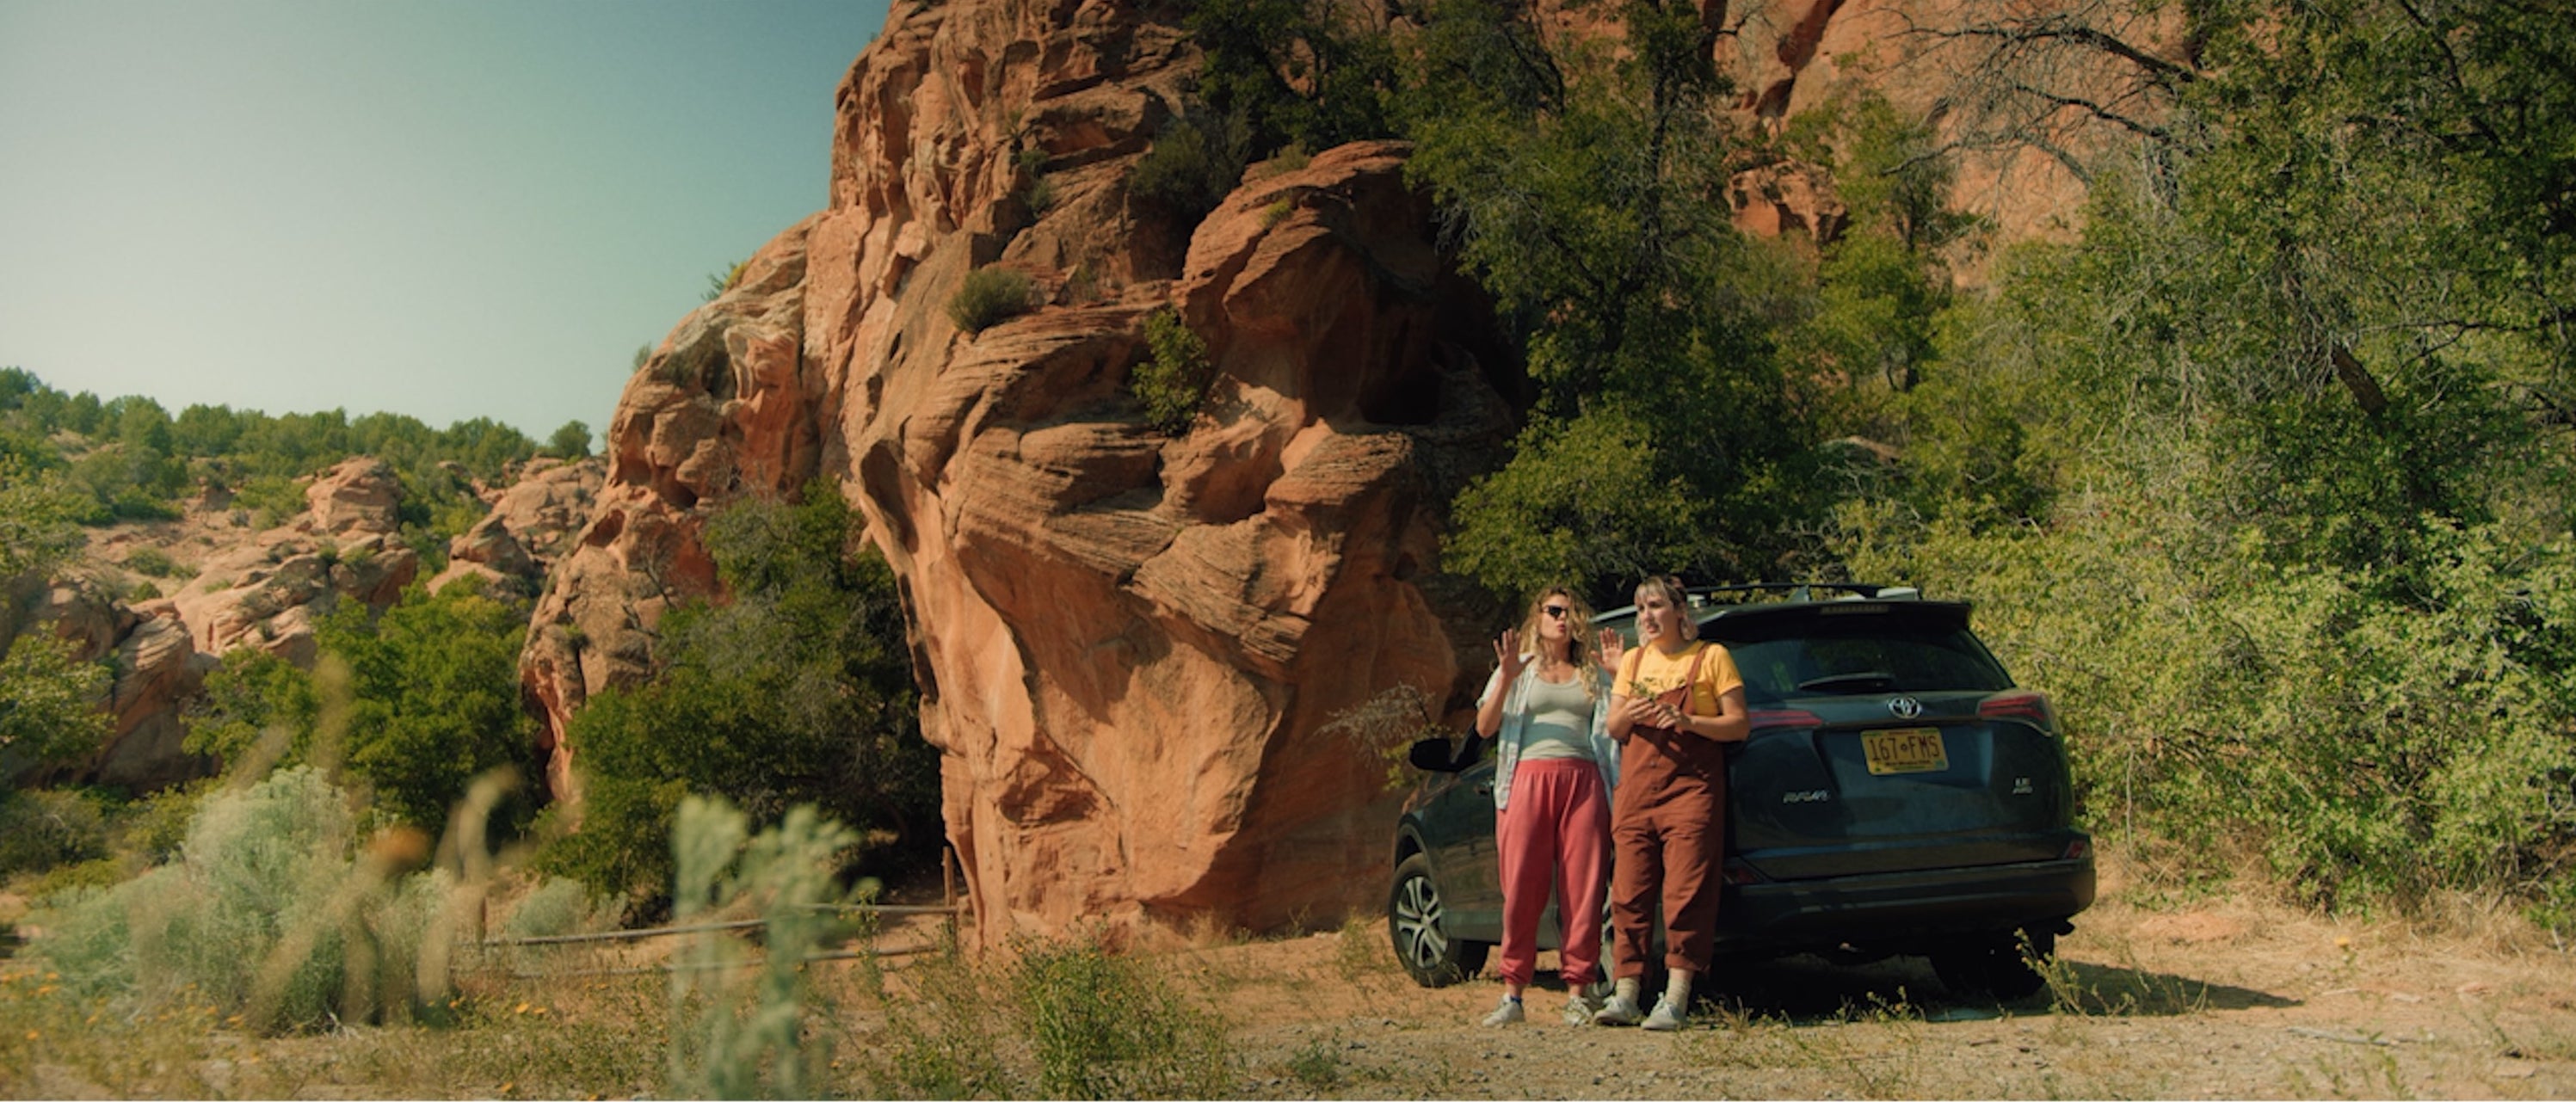 The sisters standing by a parked car near red rock mountains